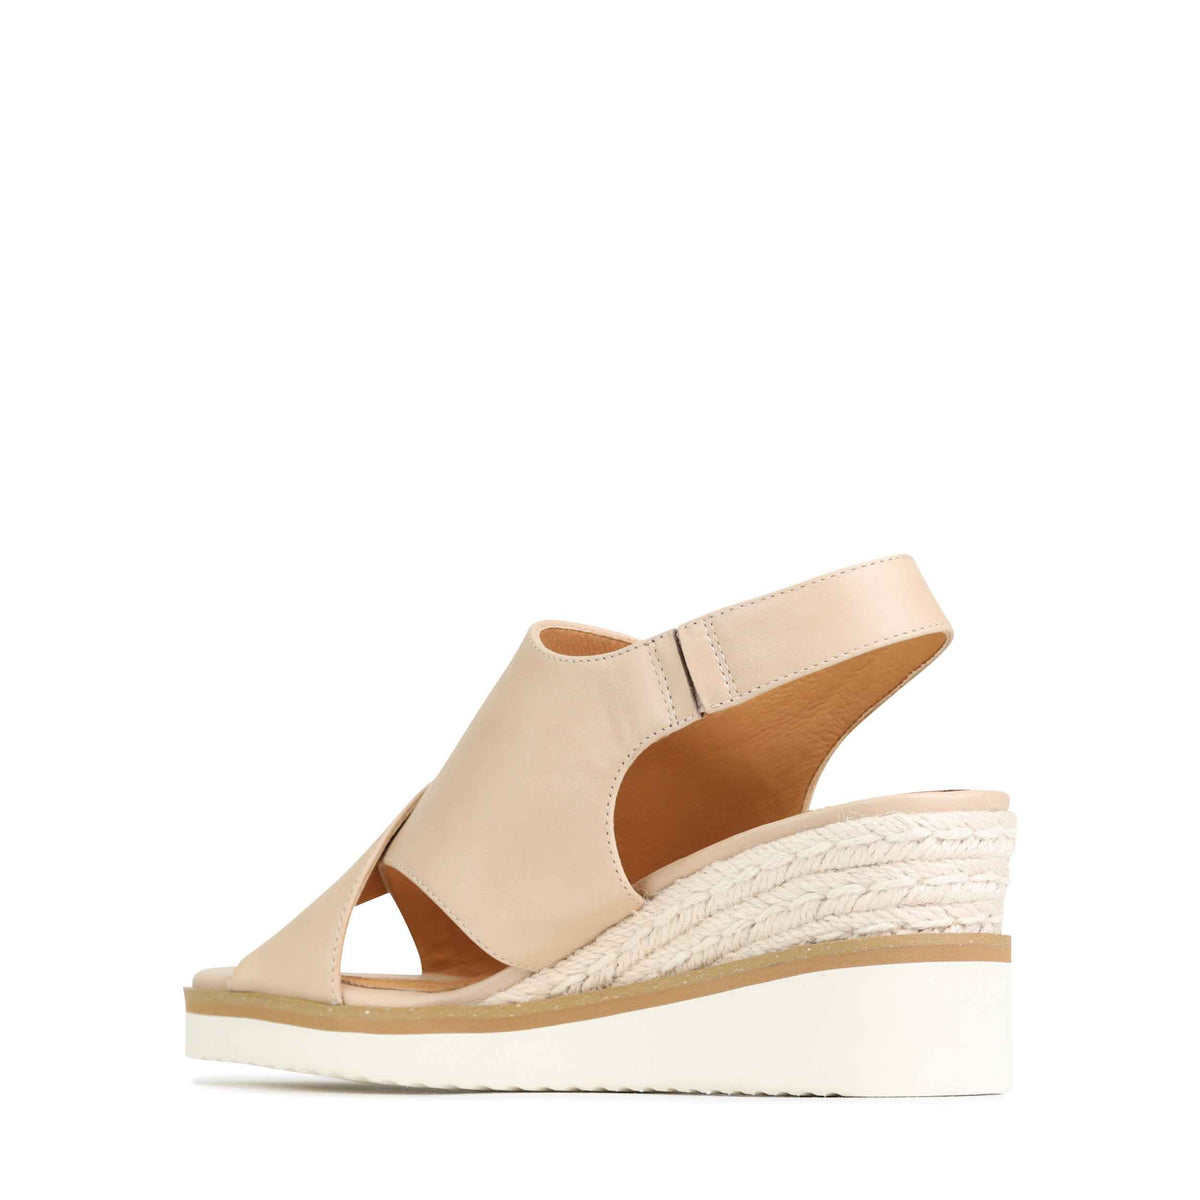 Parallel Culture Shoes and Fashion Online WEDGES EOS LAZING WEDGE